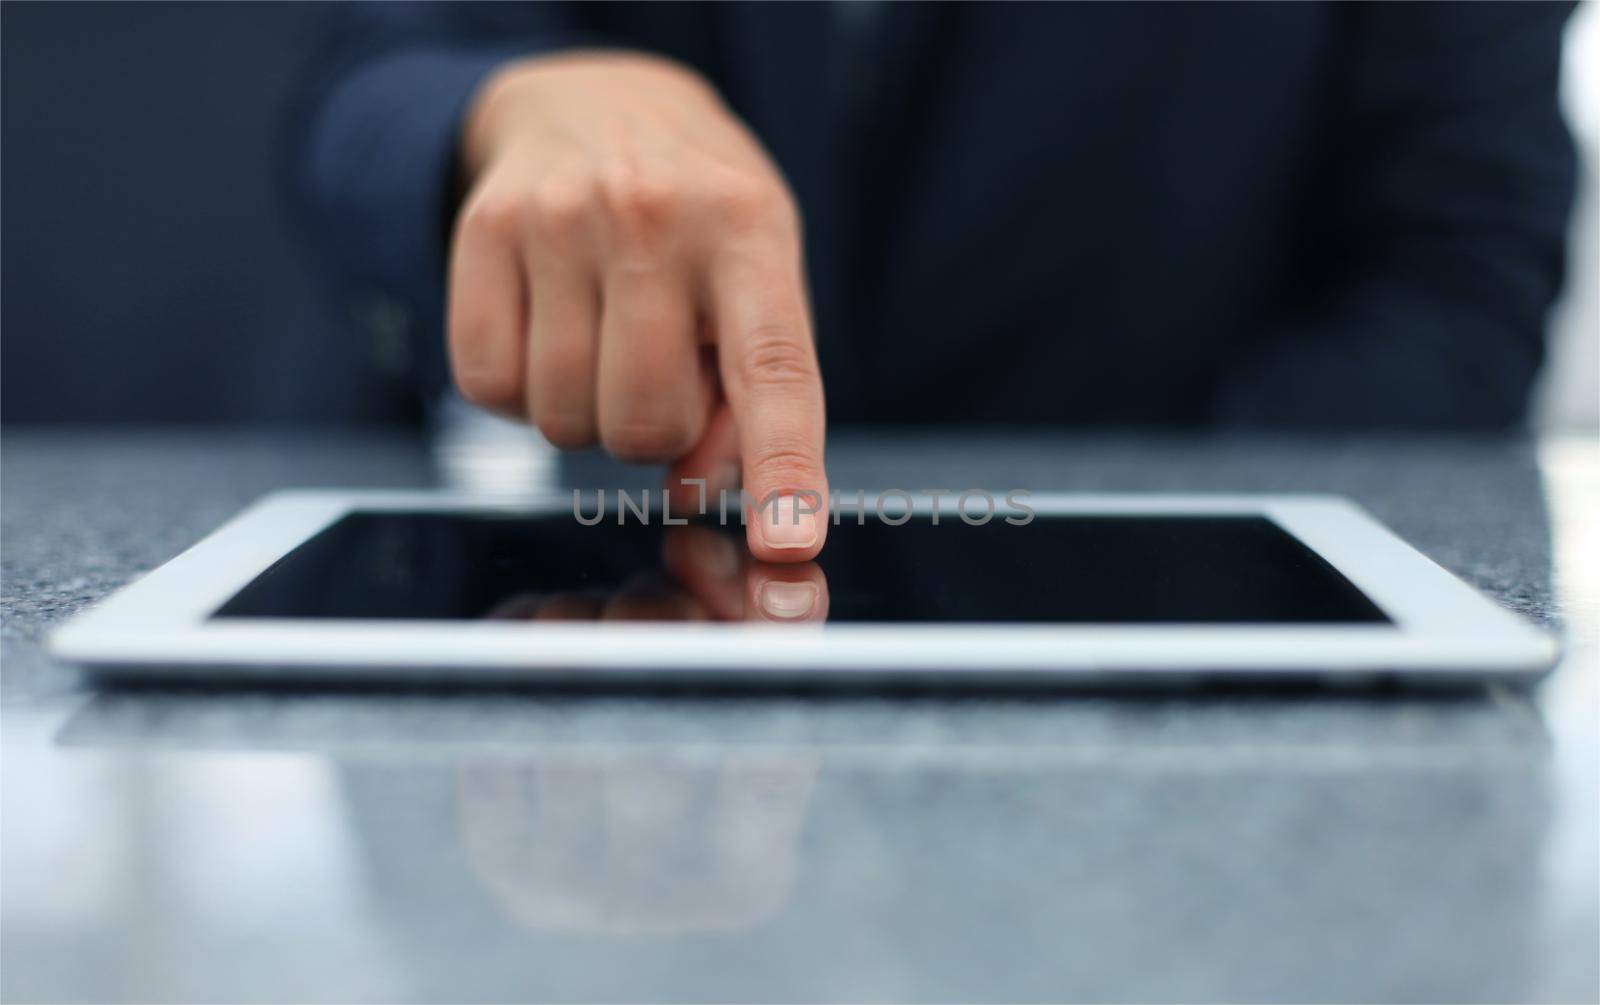 Woman hand touching screen on modern digital tablet pc. Close-up image with shallow depth of field focus on finger.